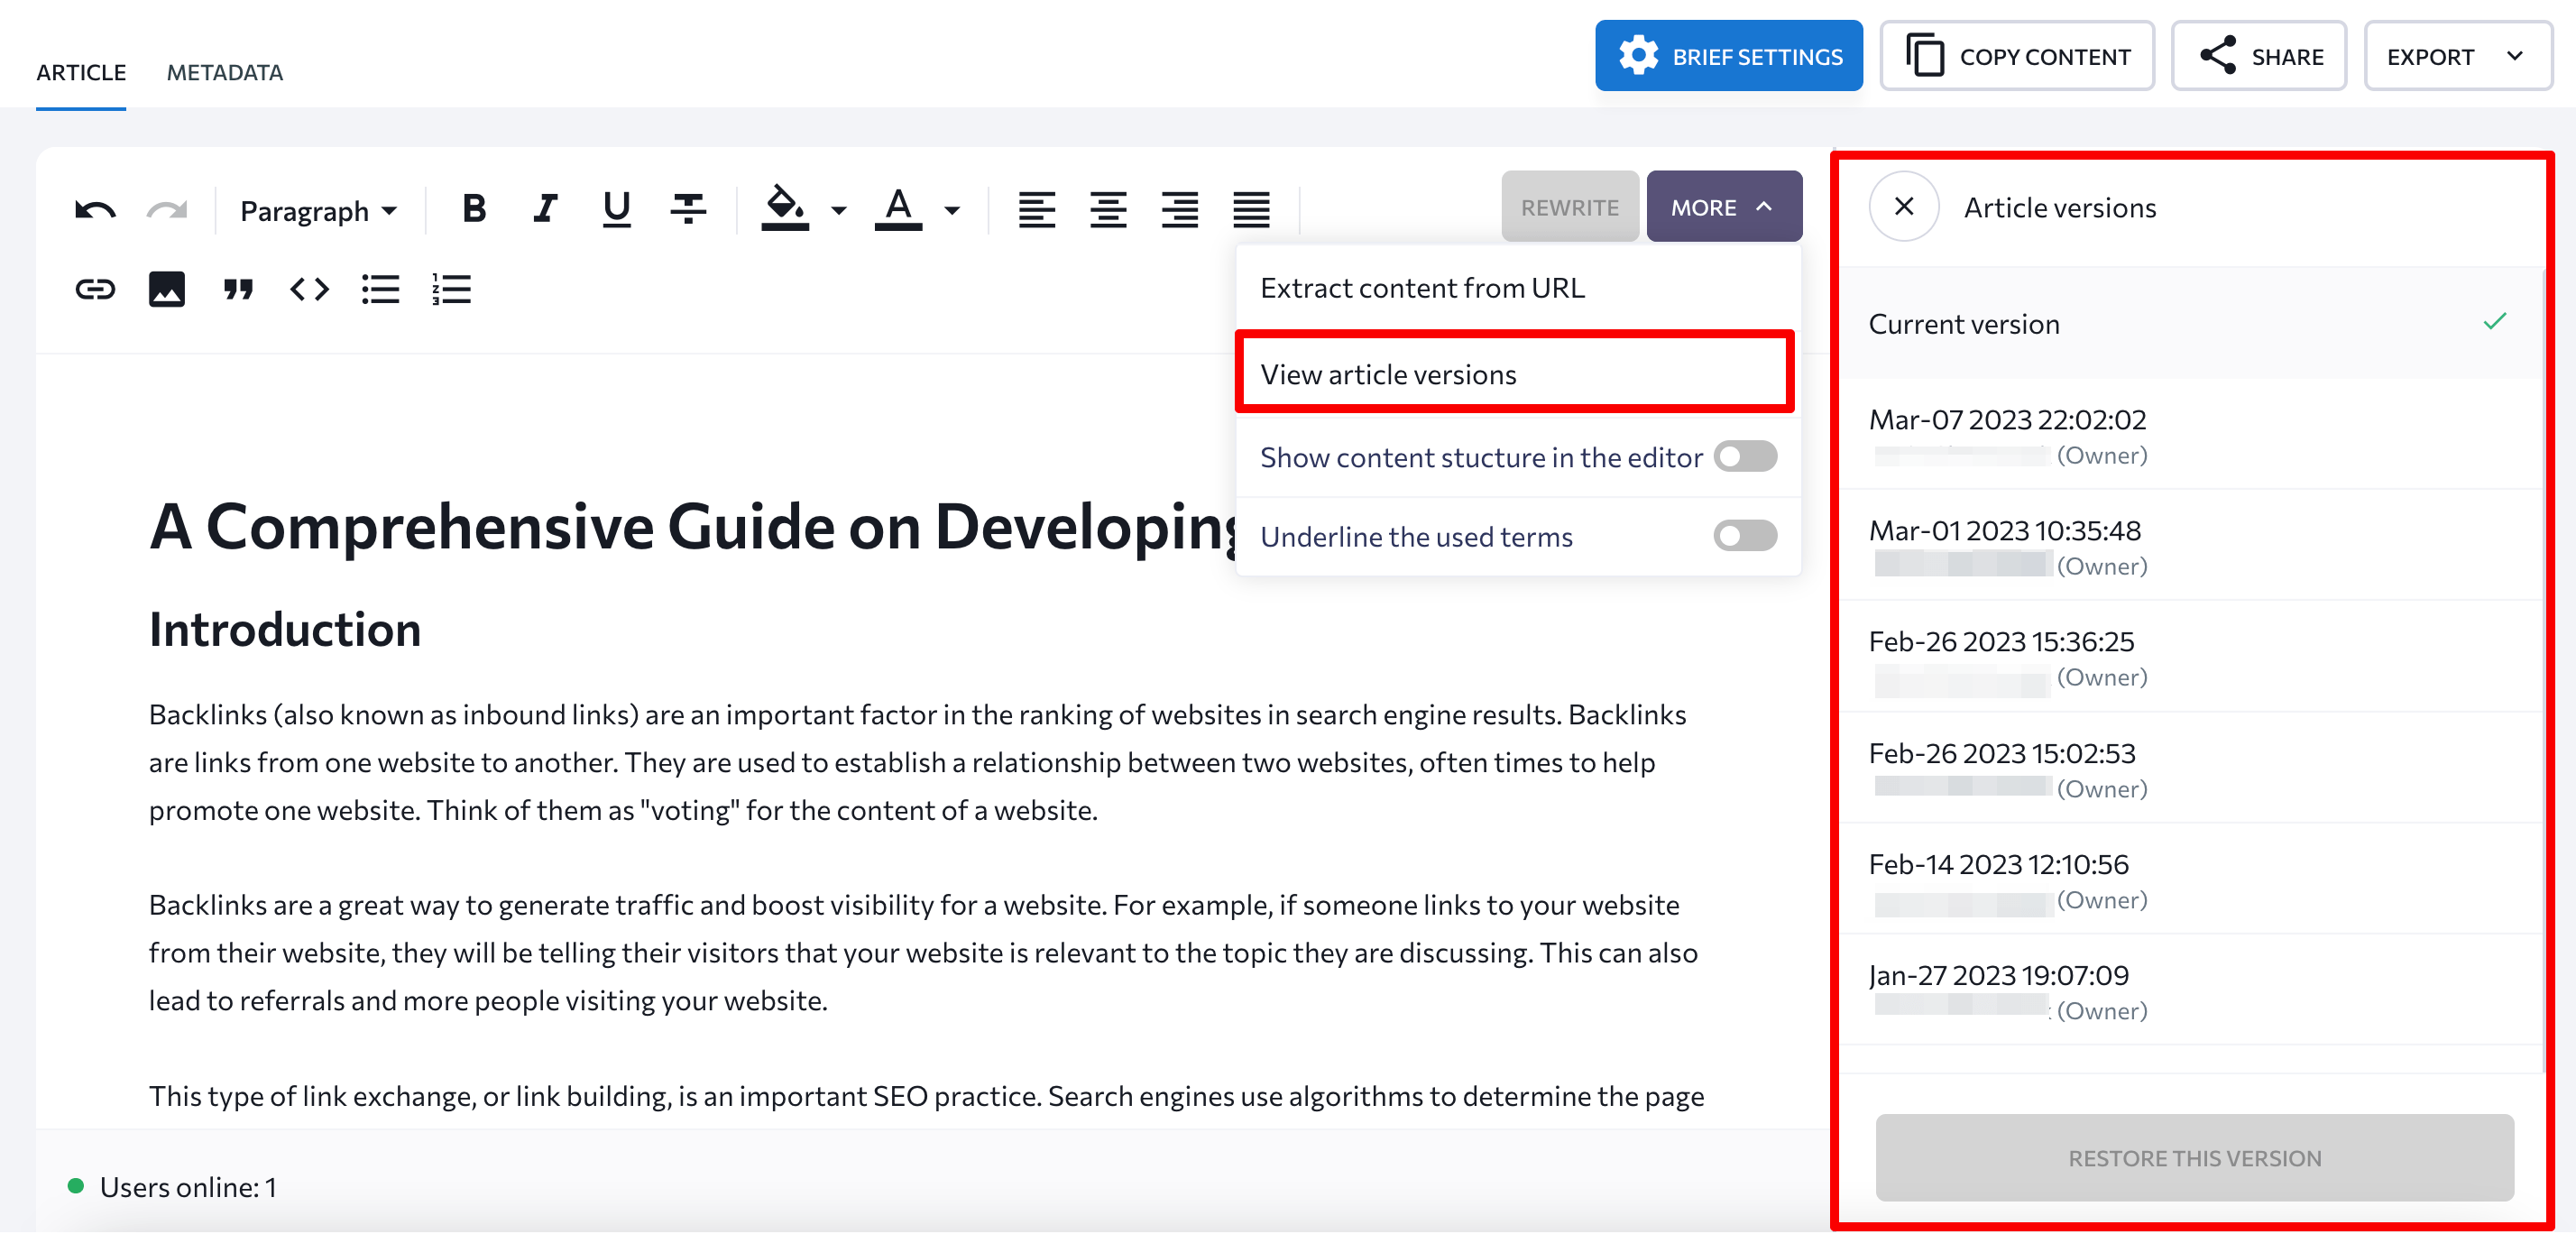 Version history feature in SE Ranking's Content Editor